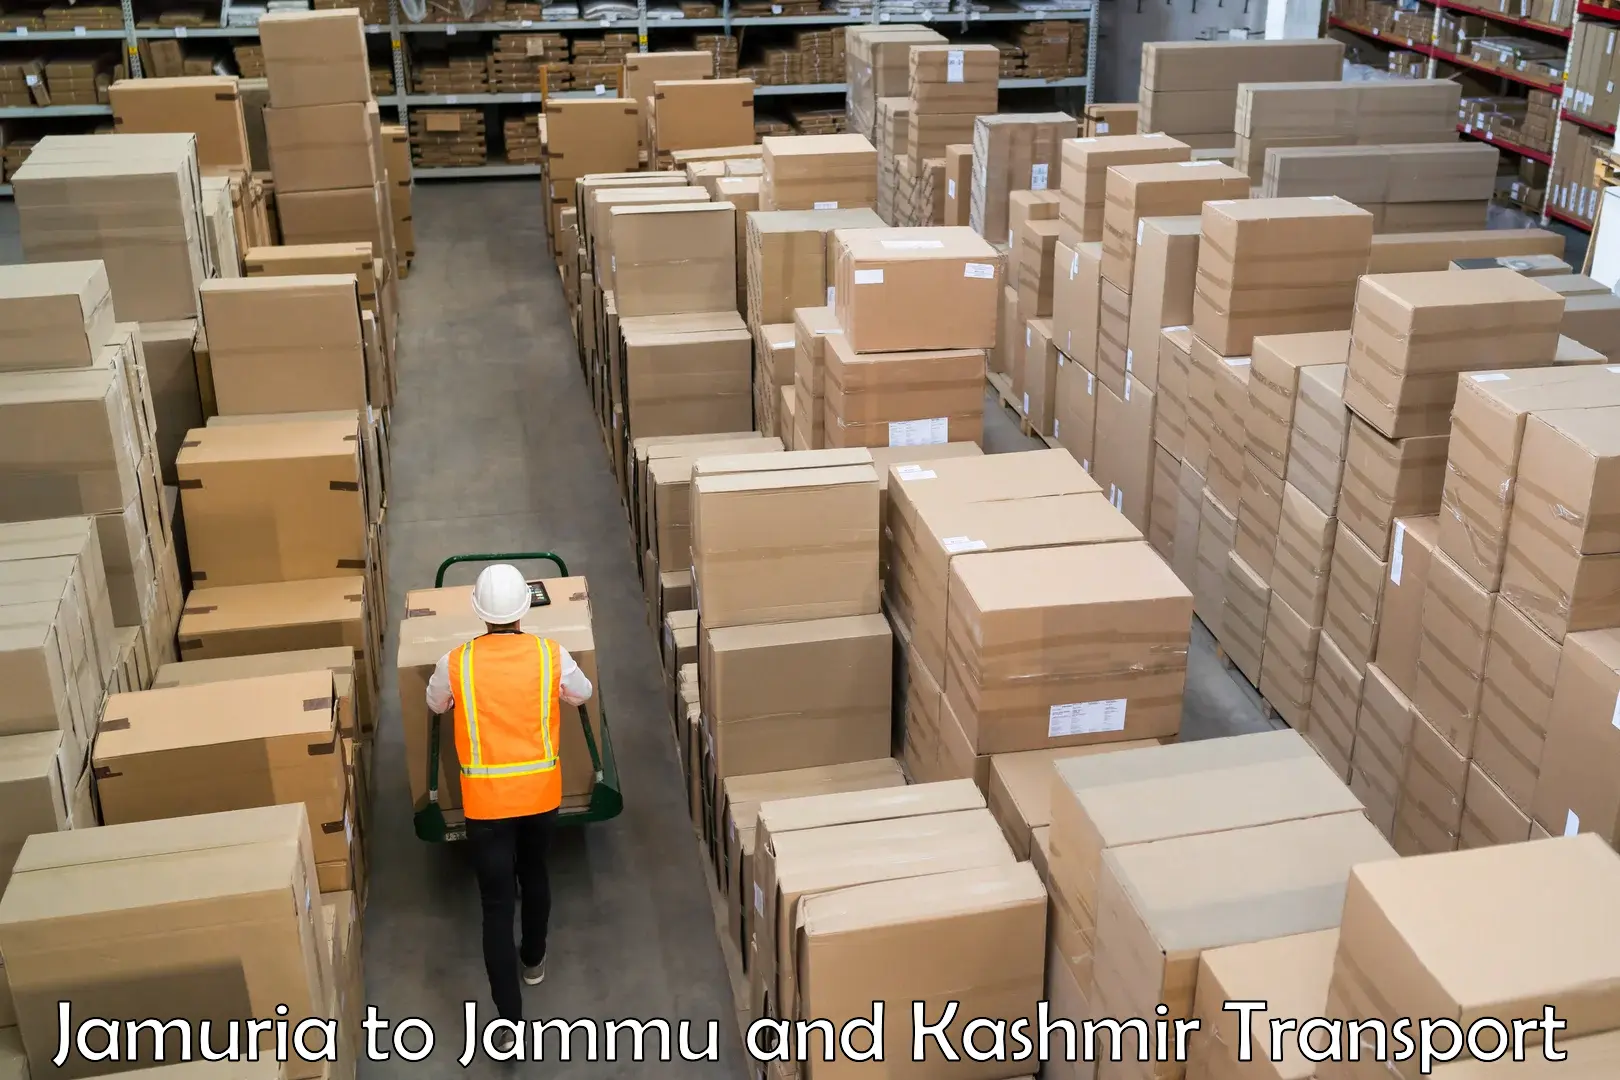 Daily parcel service transport Jamuria to Baramulla